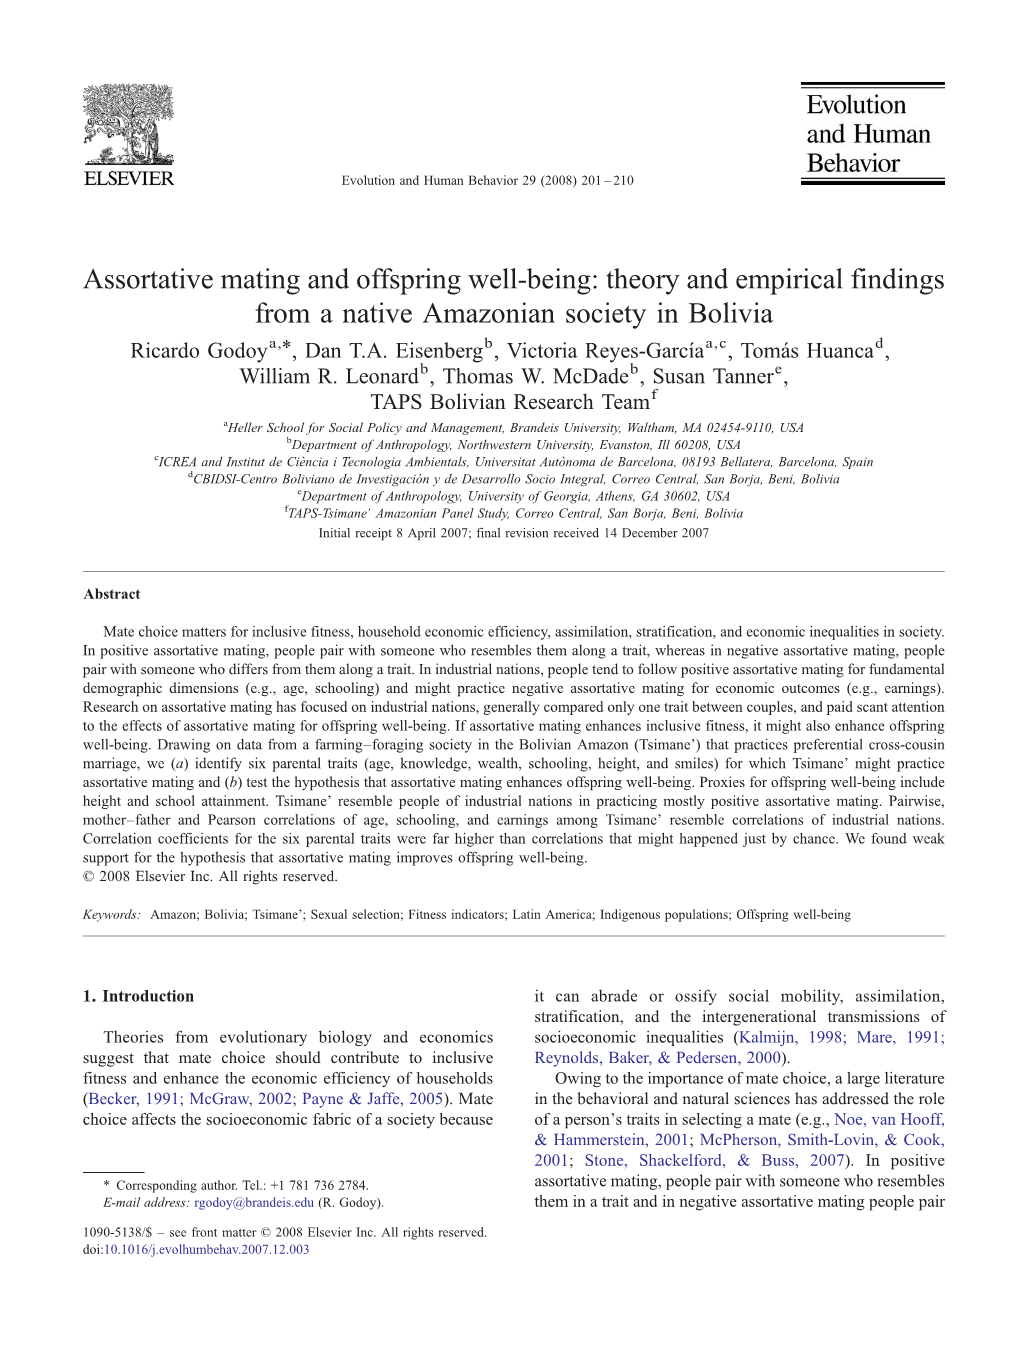 Assortative Mating and Offspring Well-Being: Theory and Empirical Findings from a Native Amazonian Society in Bolivia ⁎ Ricardo Godoya, , Dan T.A